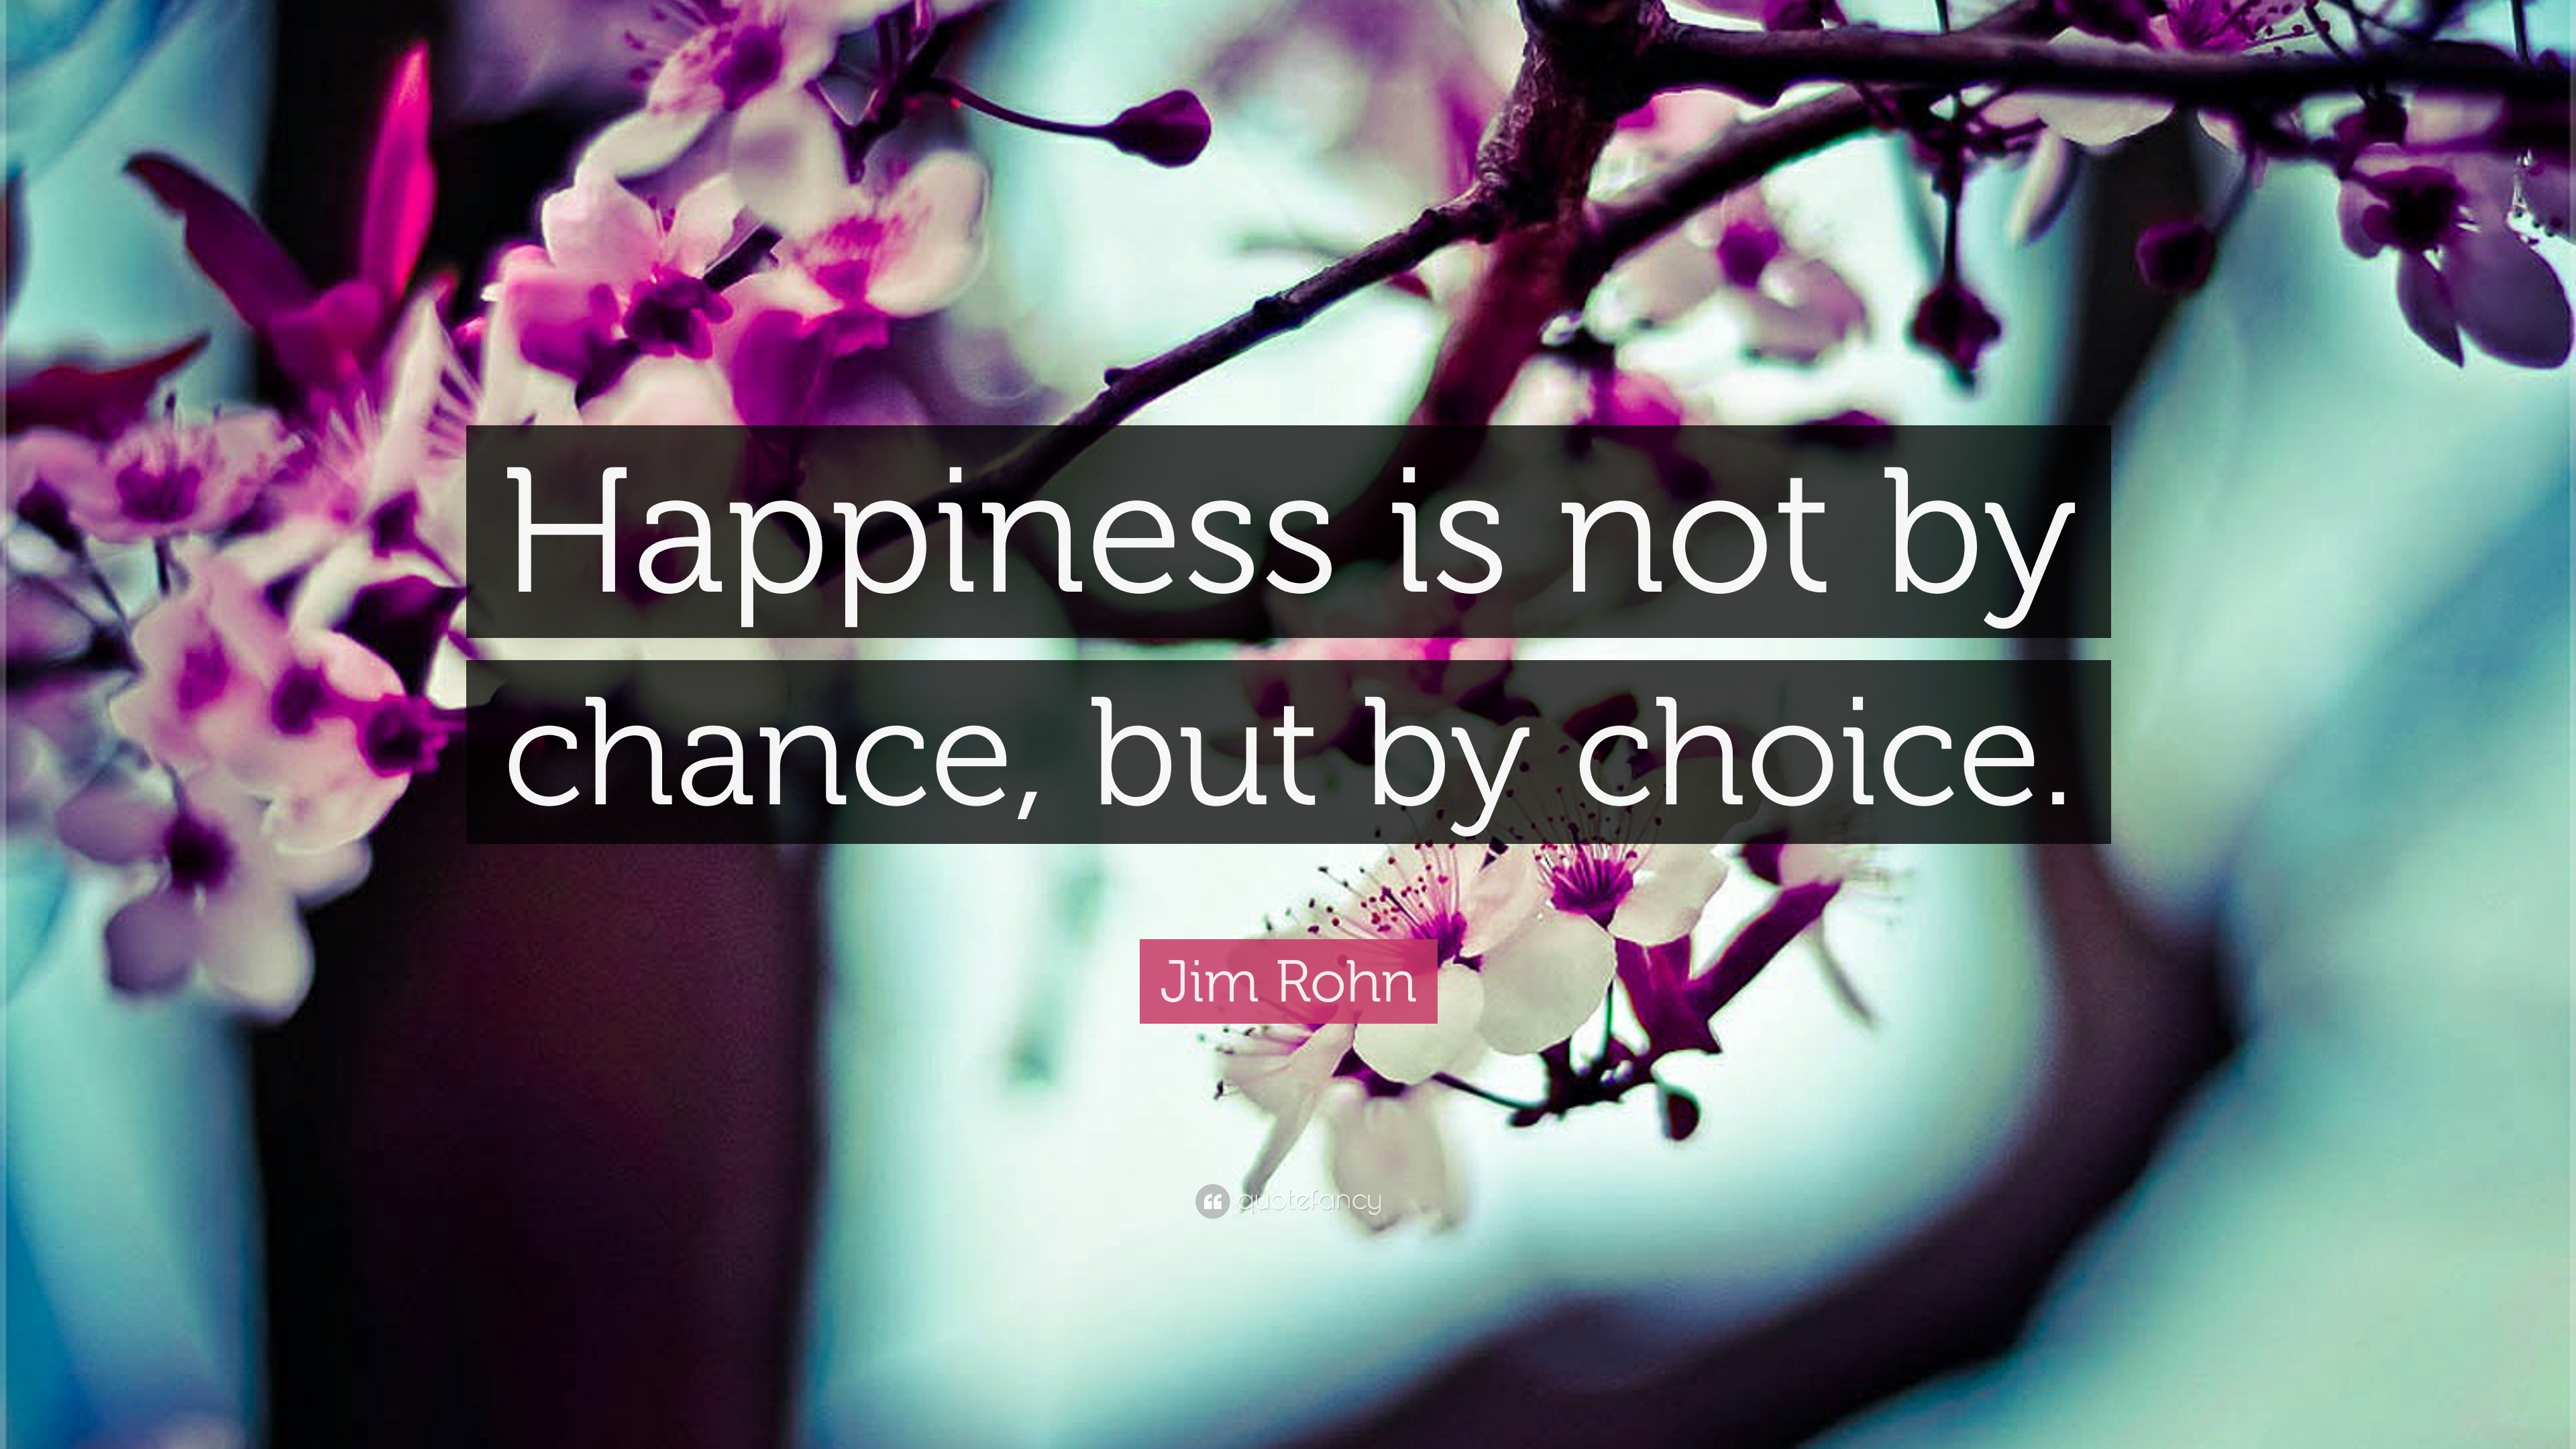 Jim Rohn Quote: “Happiness is not by chance, but by choice.”